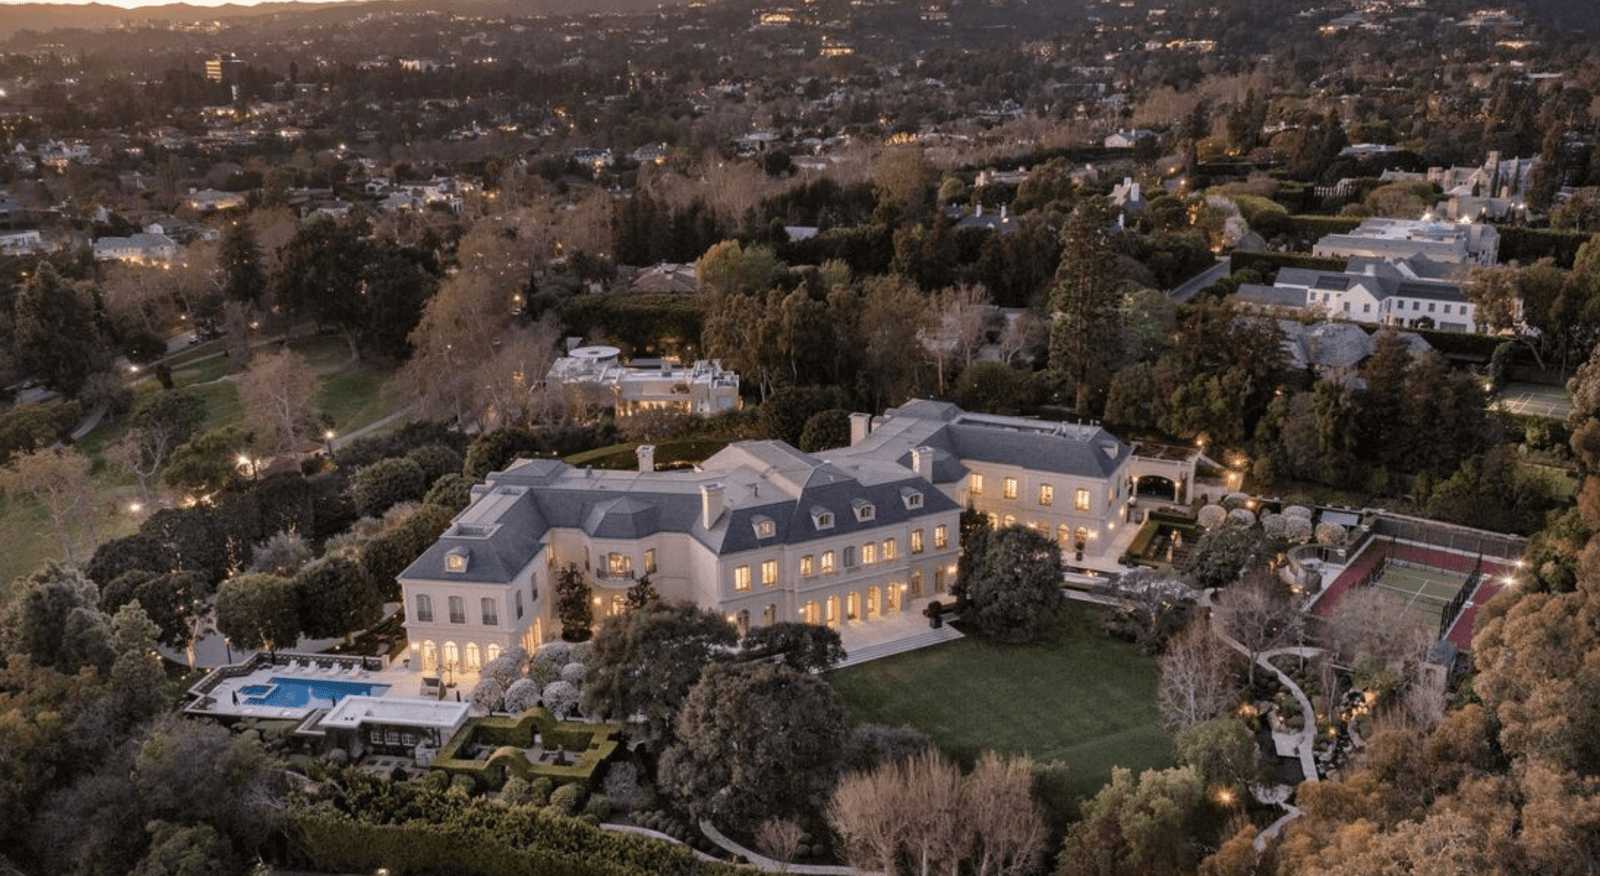 Luxury real estate - Private Mansion - Private Castle - Los Angeles Billionaire's Row in Bel Air - Holmby Hills - Los Angeles Golden Triangle - California